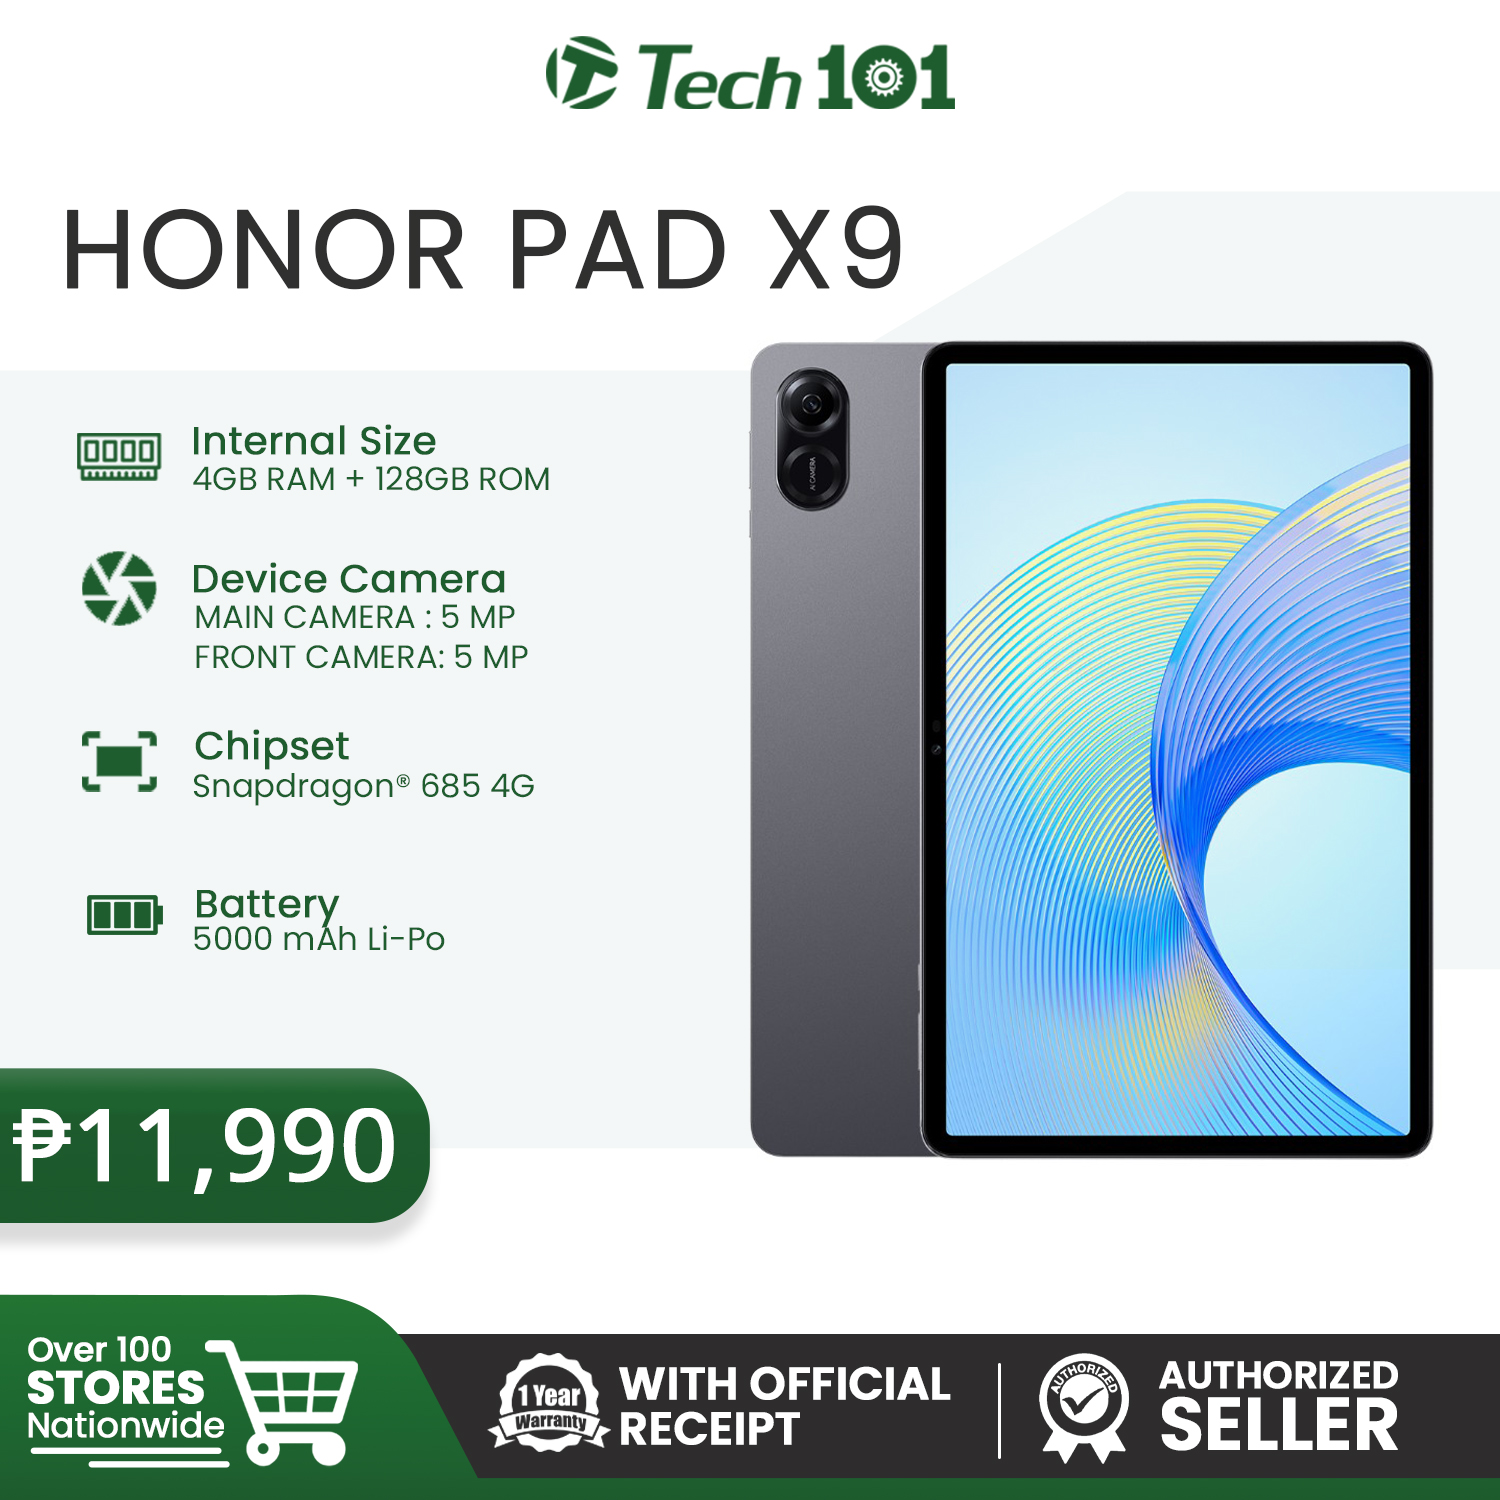 Honor Pad 8 (6GB+128GB) With Official Receipt With Warranty - Authorized  Dealer